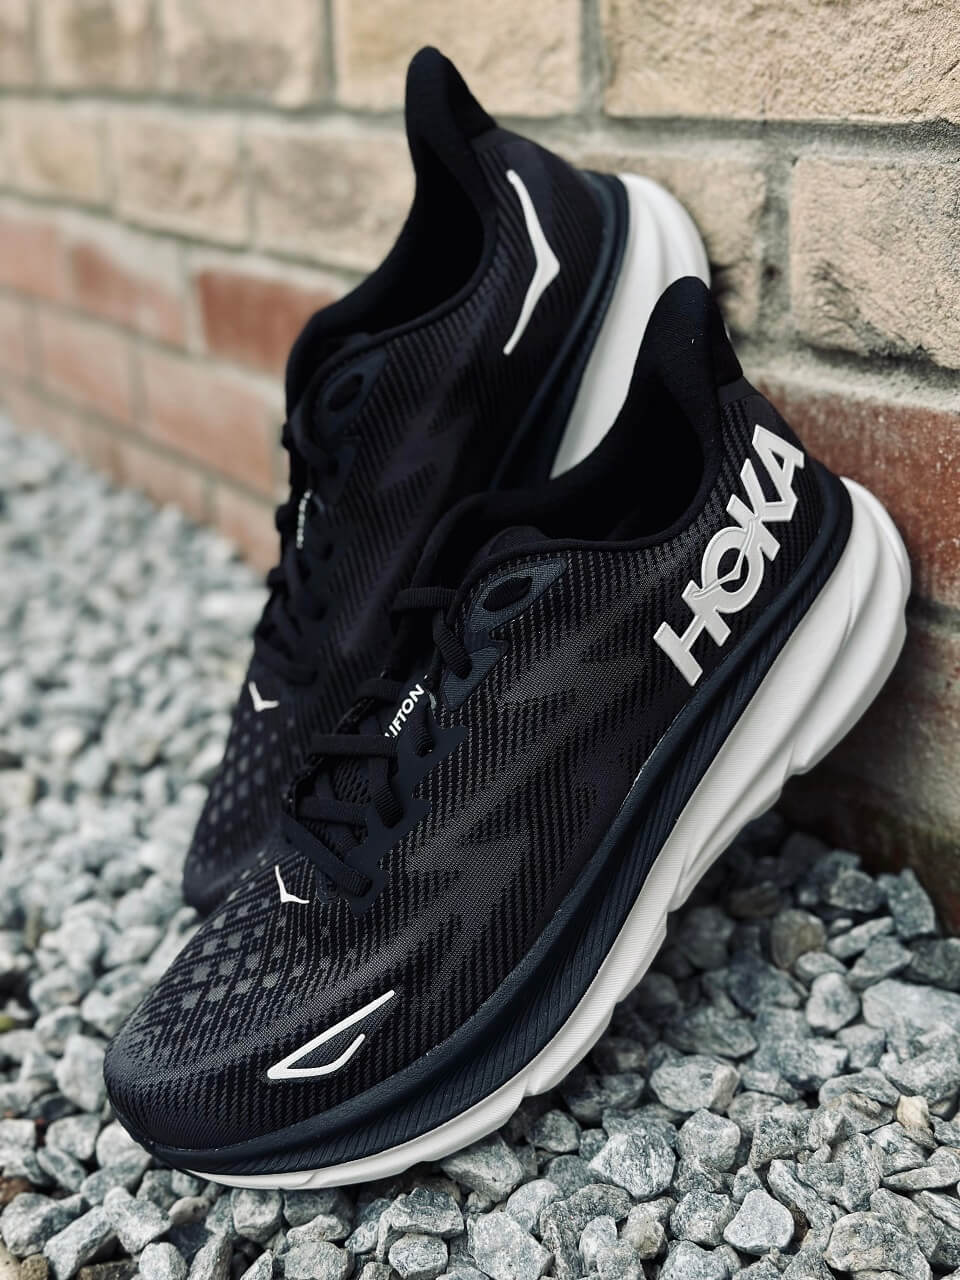 HOKA Clifton 9 running shoes in black propped up against a brick wall